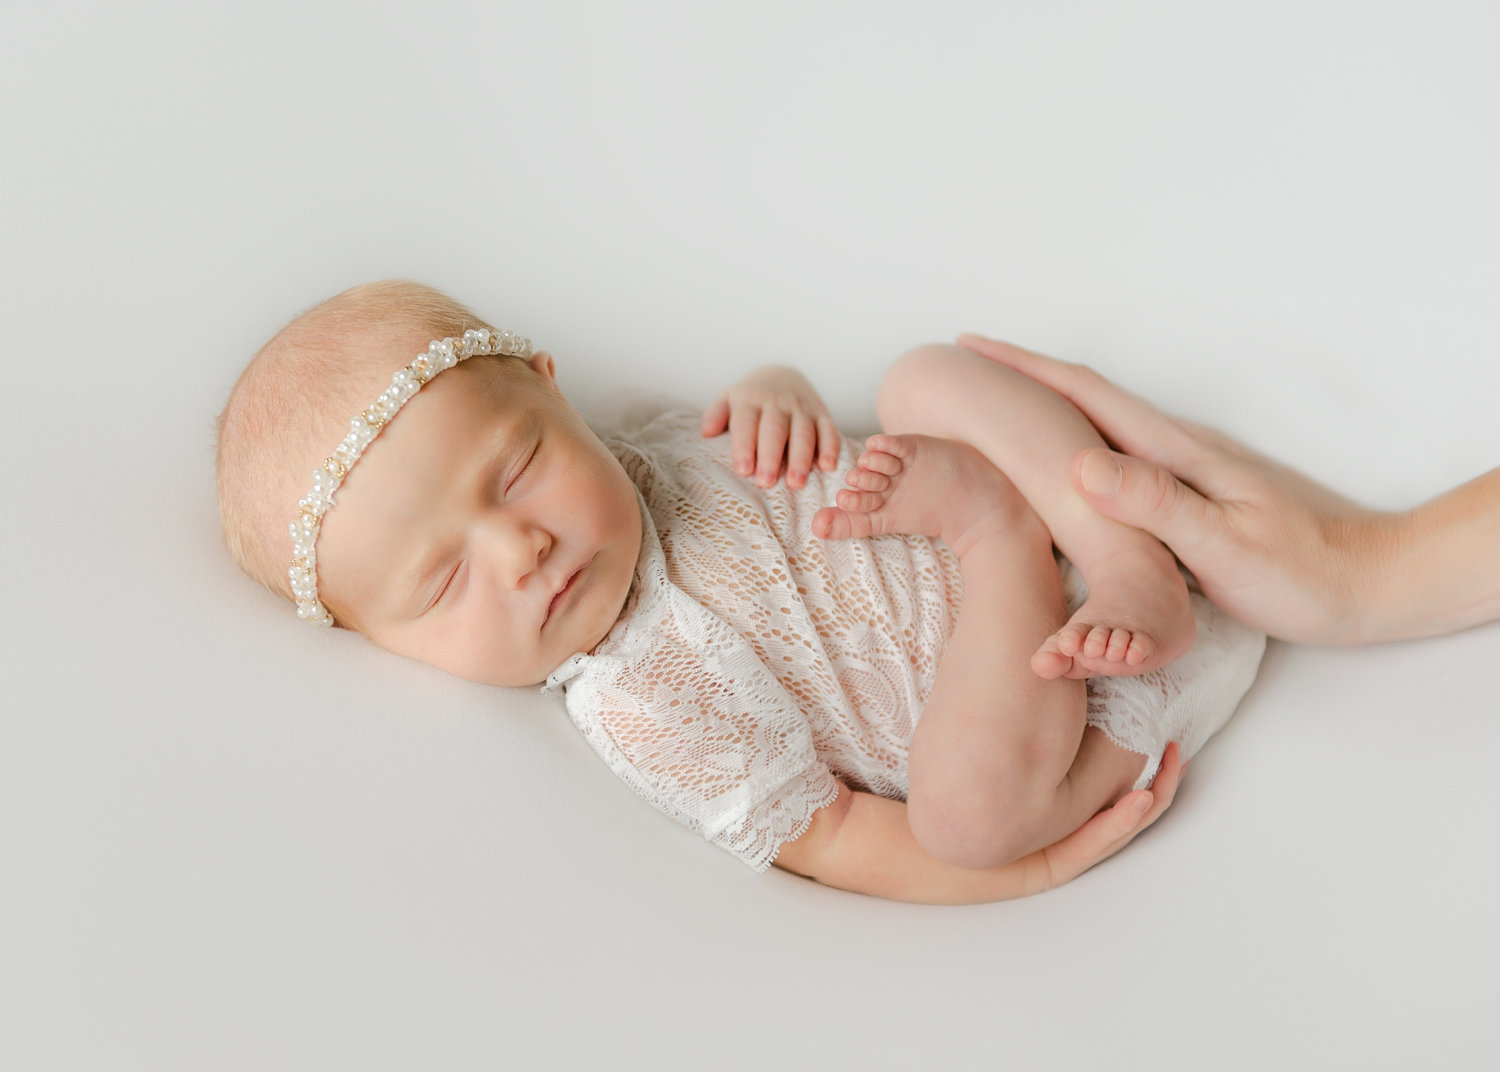 newborn baby girl wearing a lace onesie and an eyelet headband